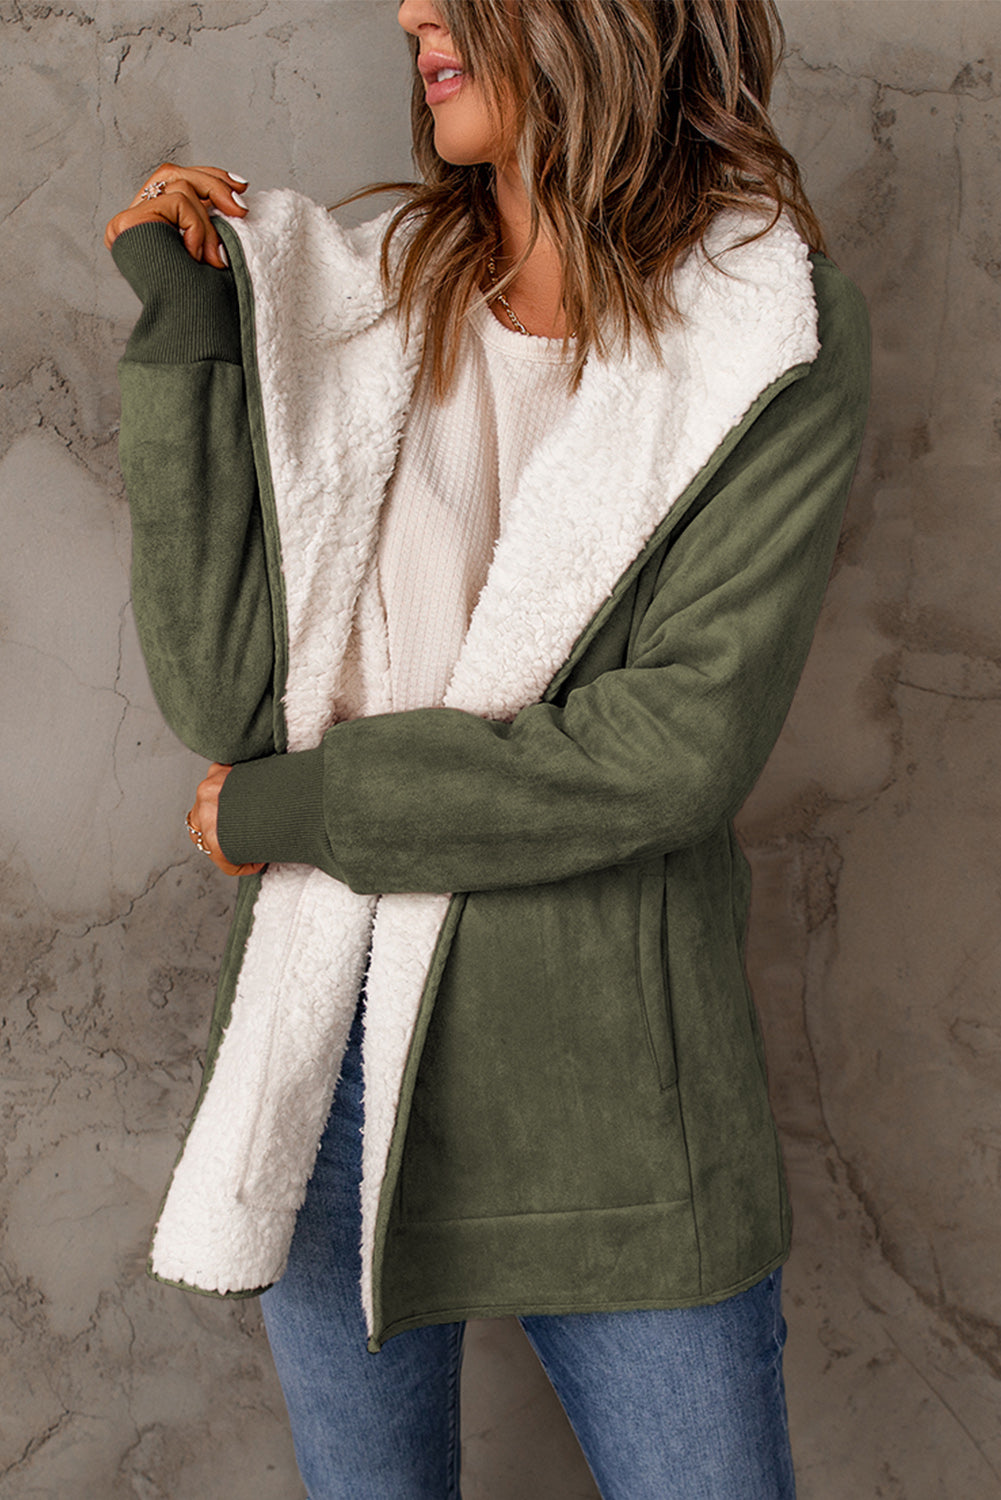 Green Faux Suede Fleece Lined Open Front Jacket clothes Color Green DL Chic DL Exclusive Fabric Fleece Jackets & Coats Occasion Daily Print Solid Color Season Winter Style Casual